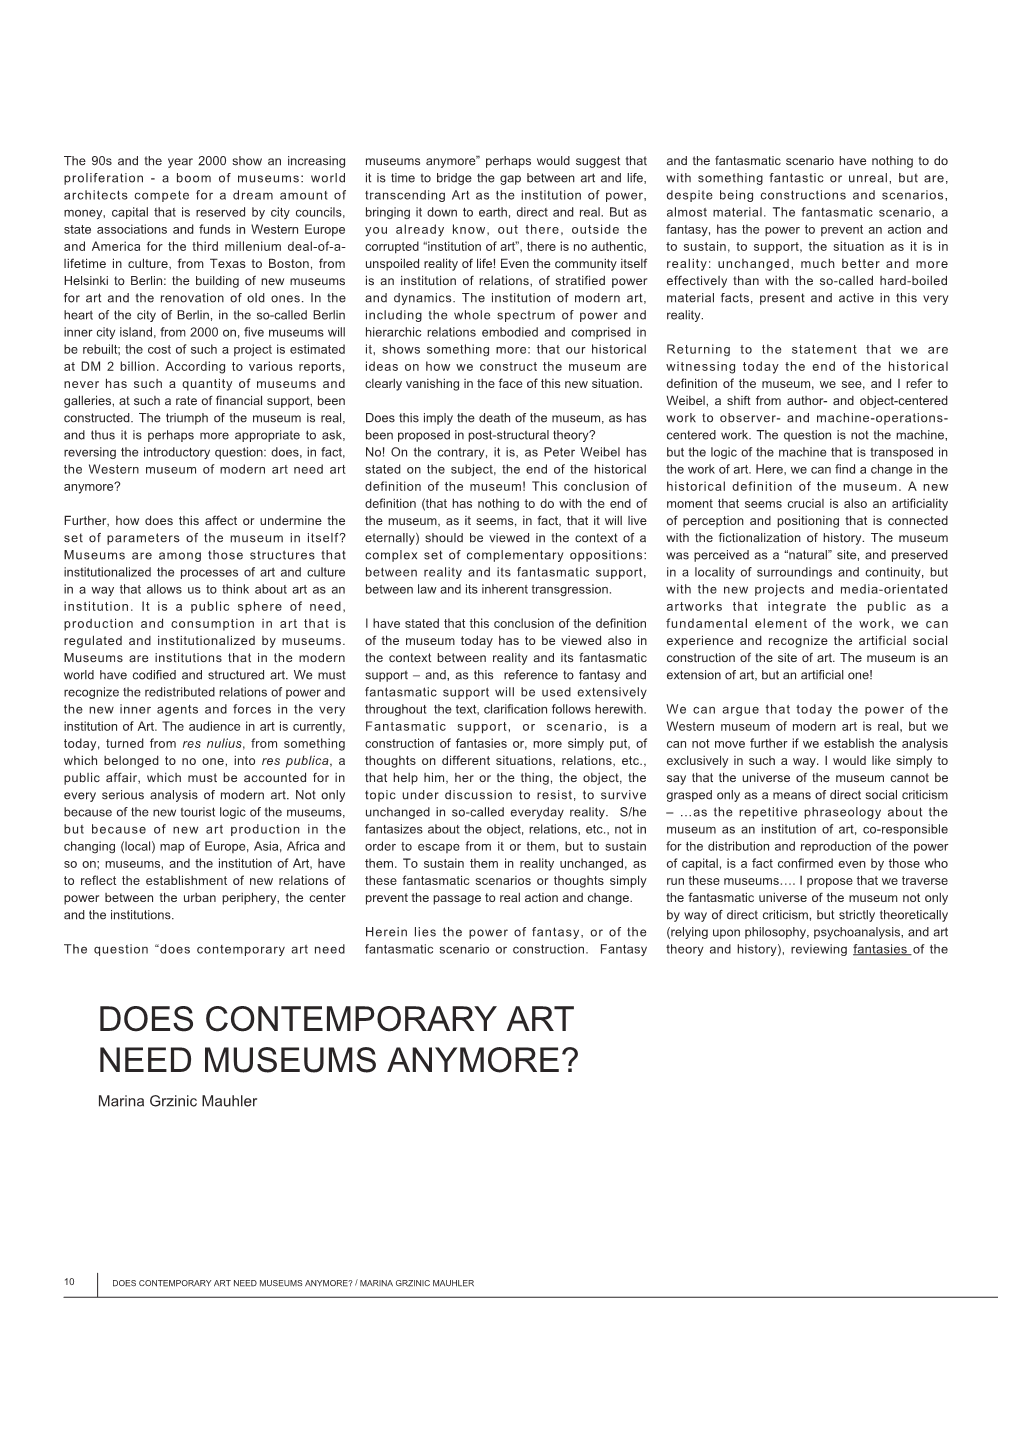 DOES CONTEMPORARY ART NEED MUSEUMS ANYMORE? Marina Grzinic Mauhler